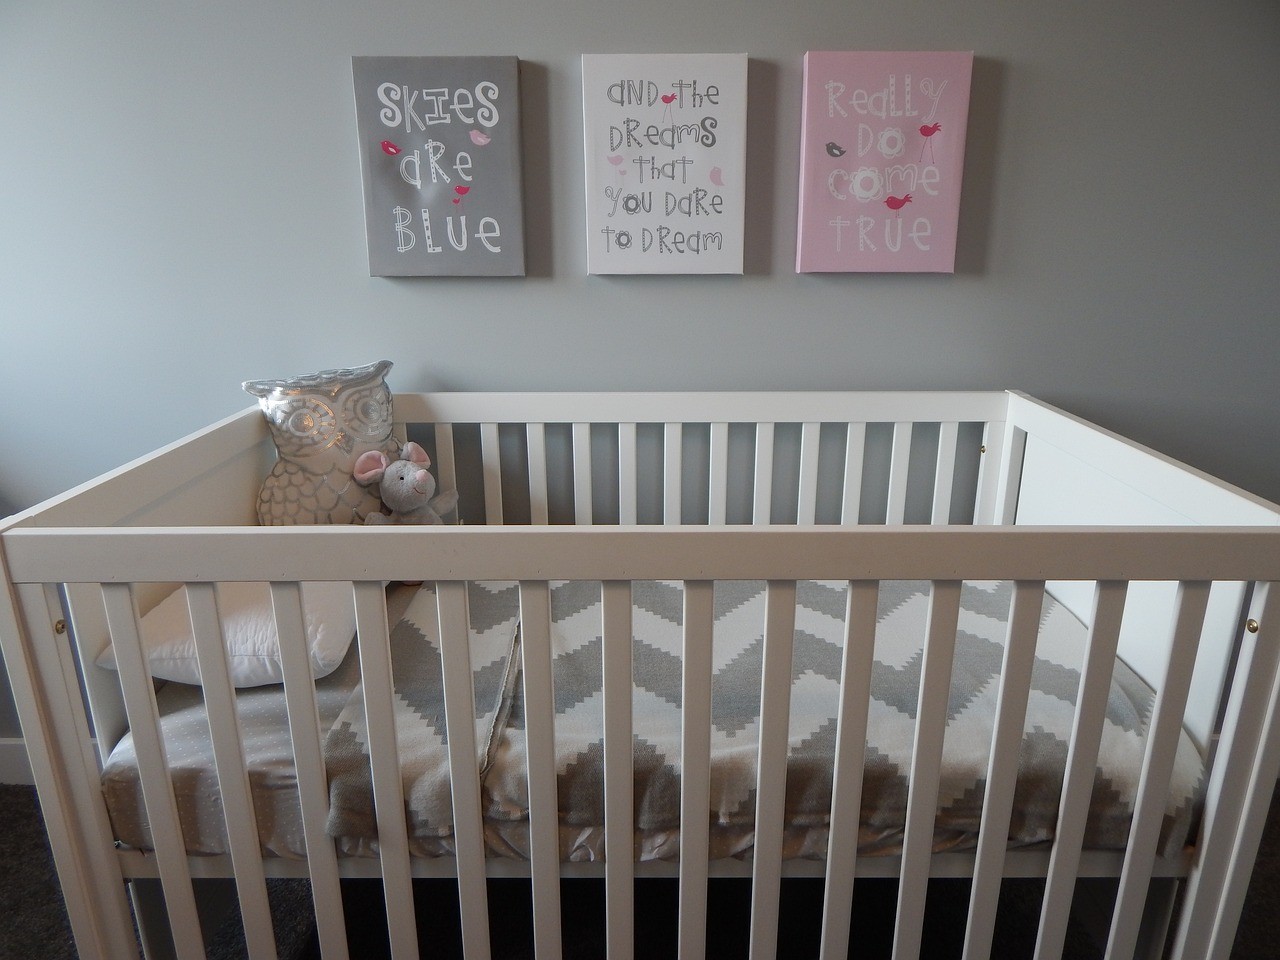 Best Affordable Cribs